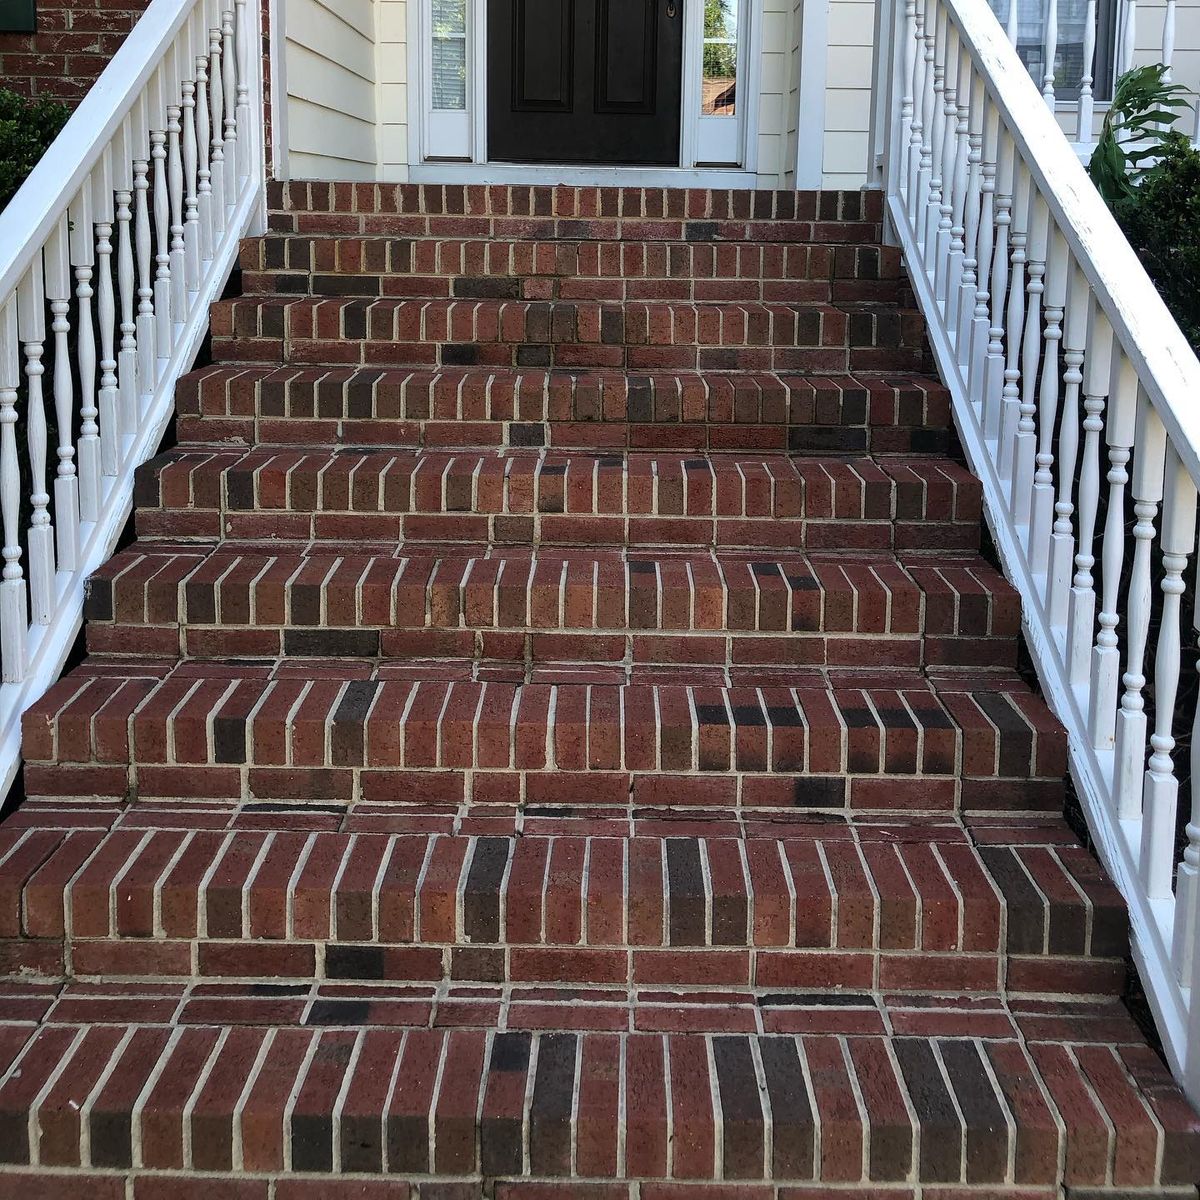 Deck & Patio Cleaning for Pugh's Dependable Services, L.L.C. in Raleigh, NC